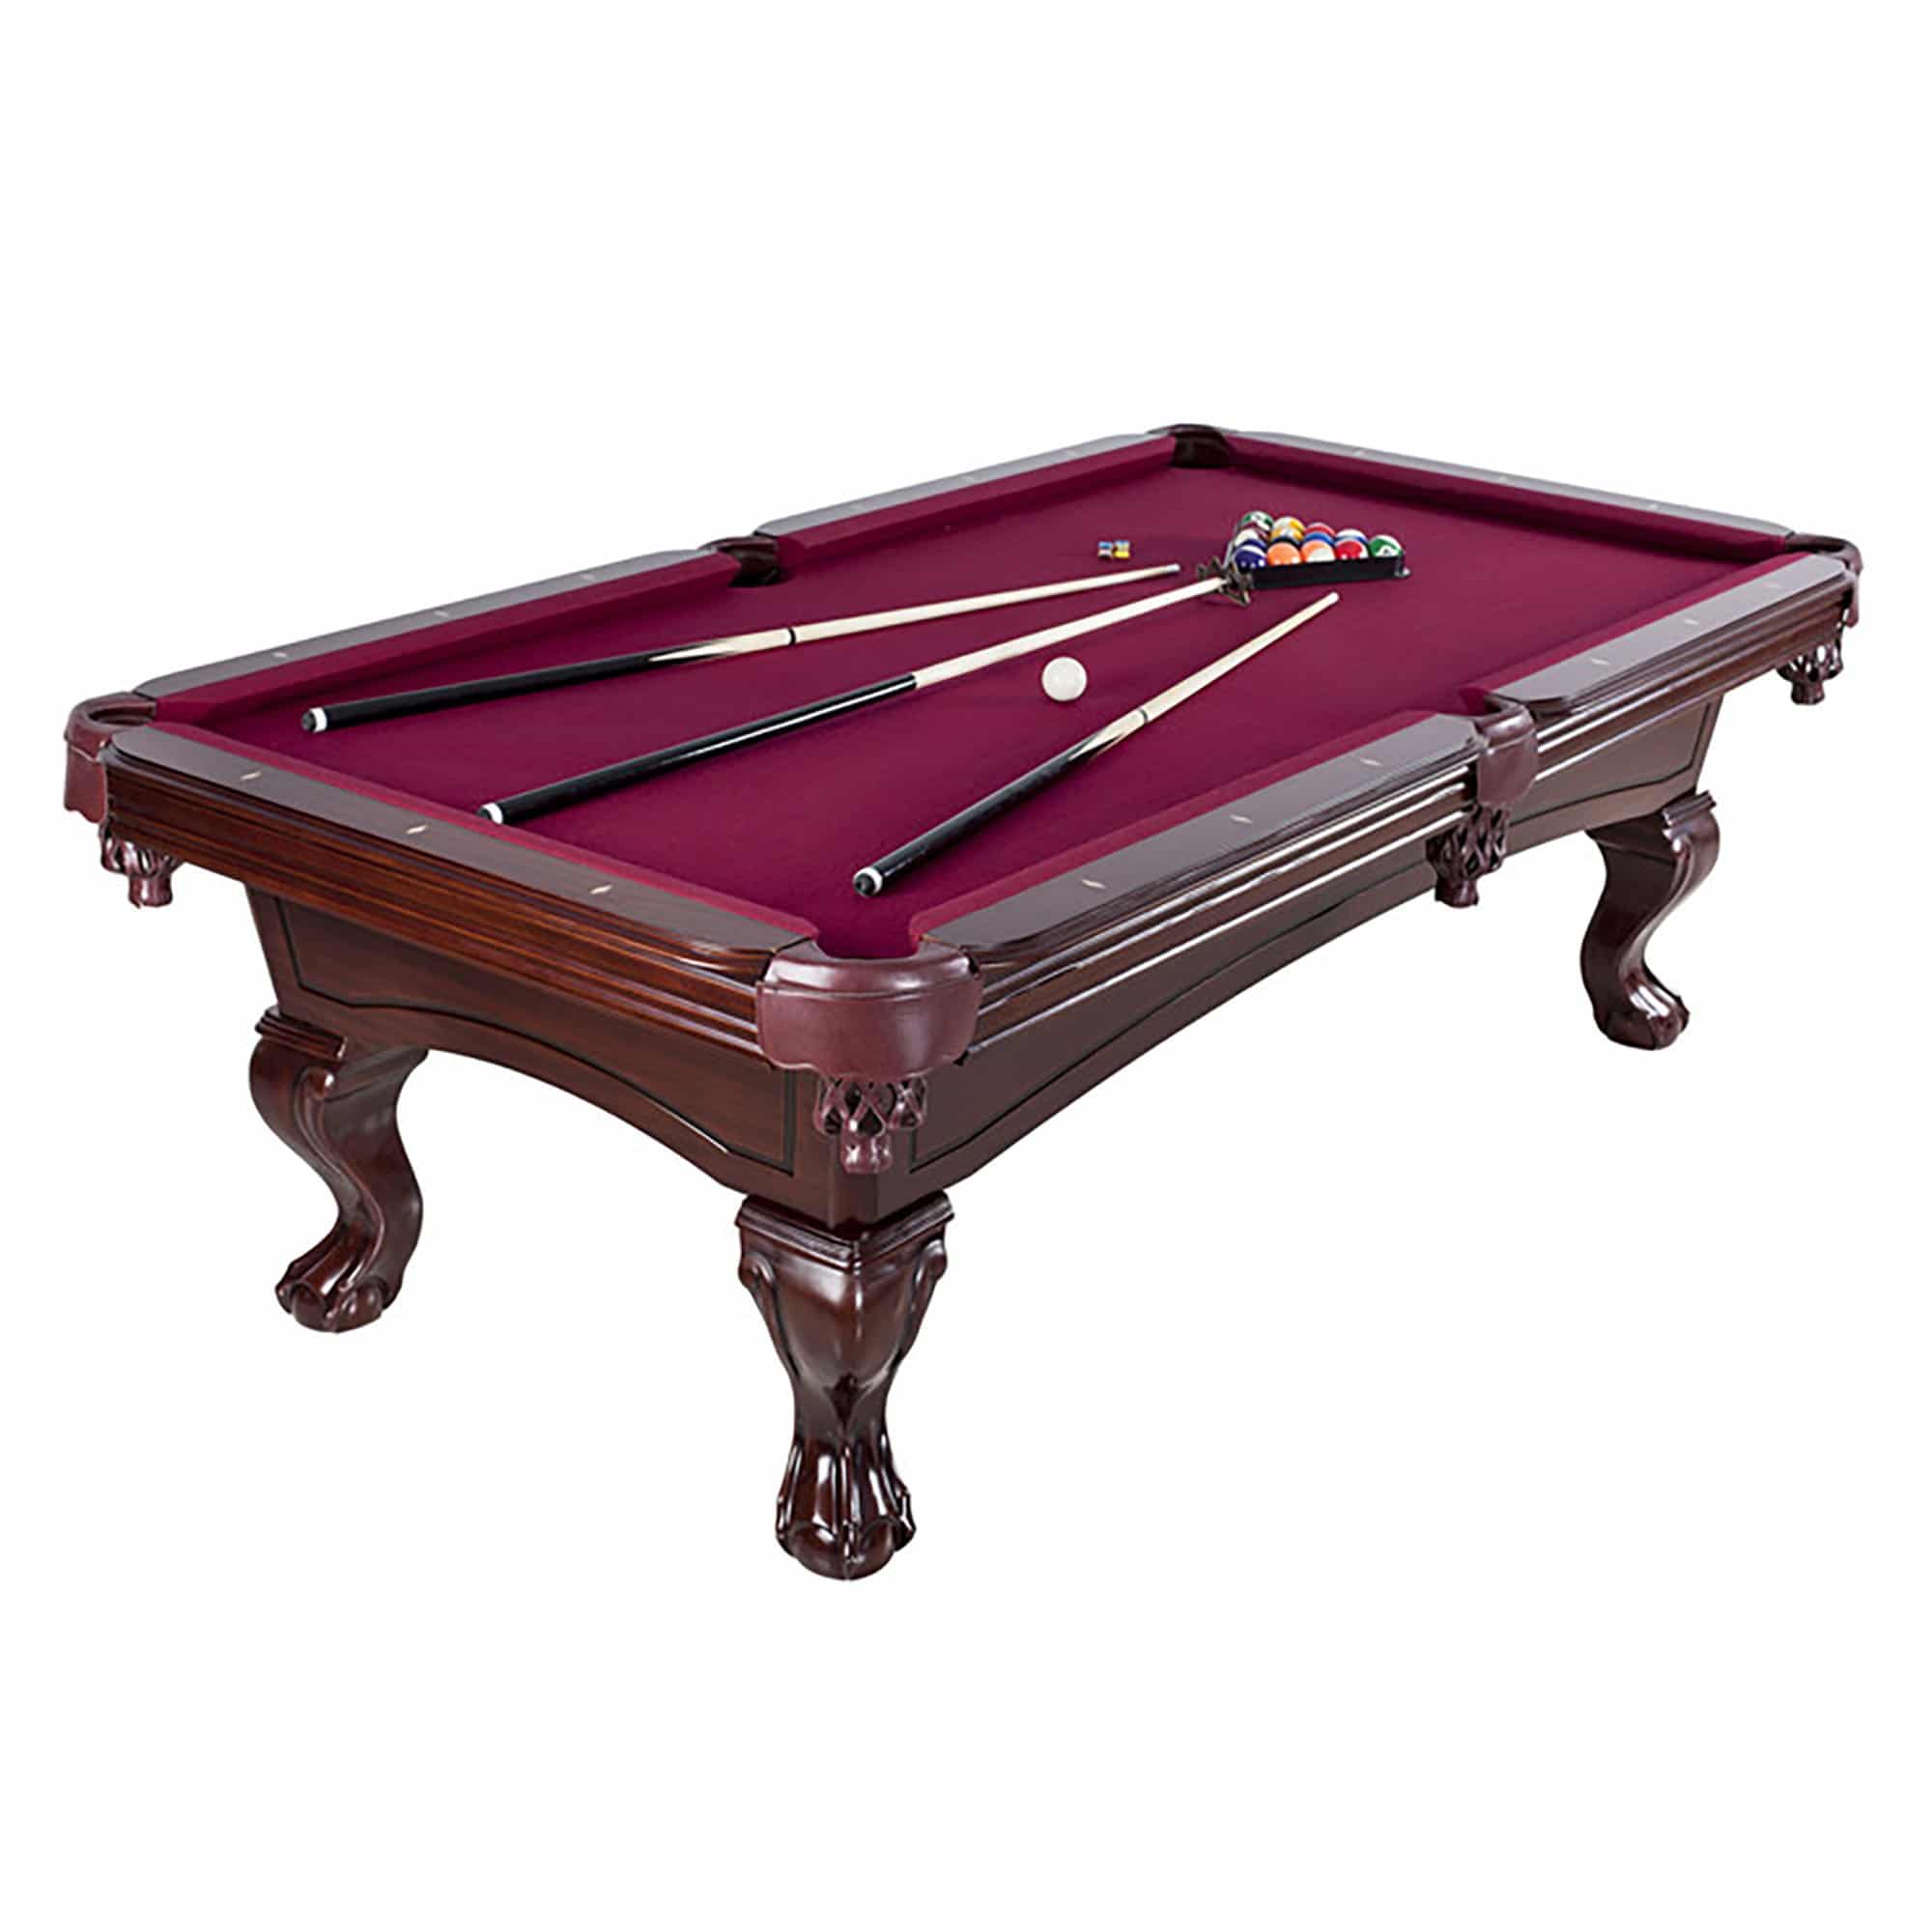 Augusta 8 Ft Non Slate Pool Table In Mahogany 01 